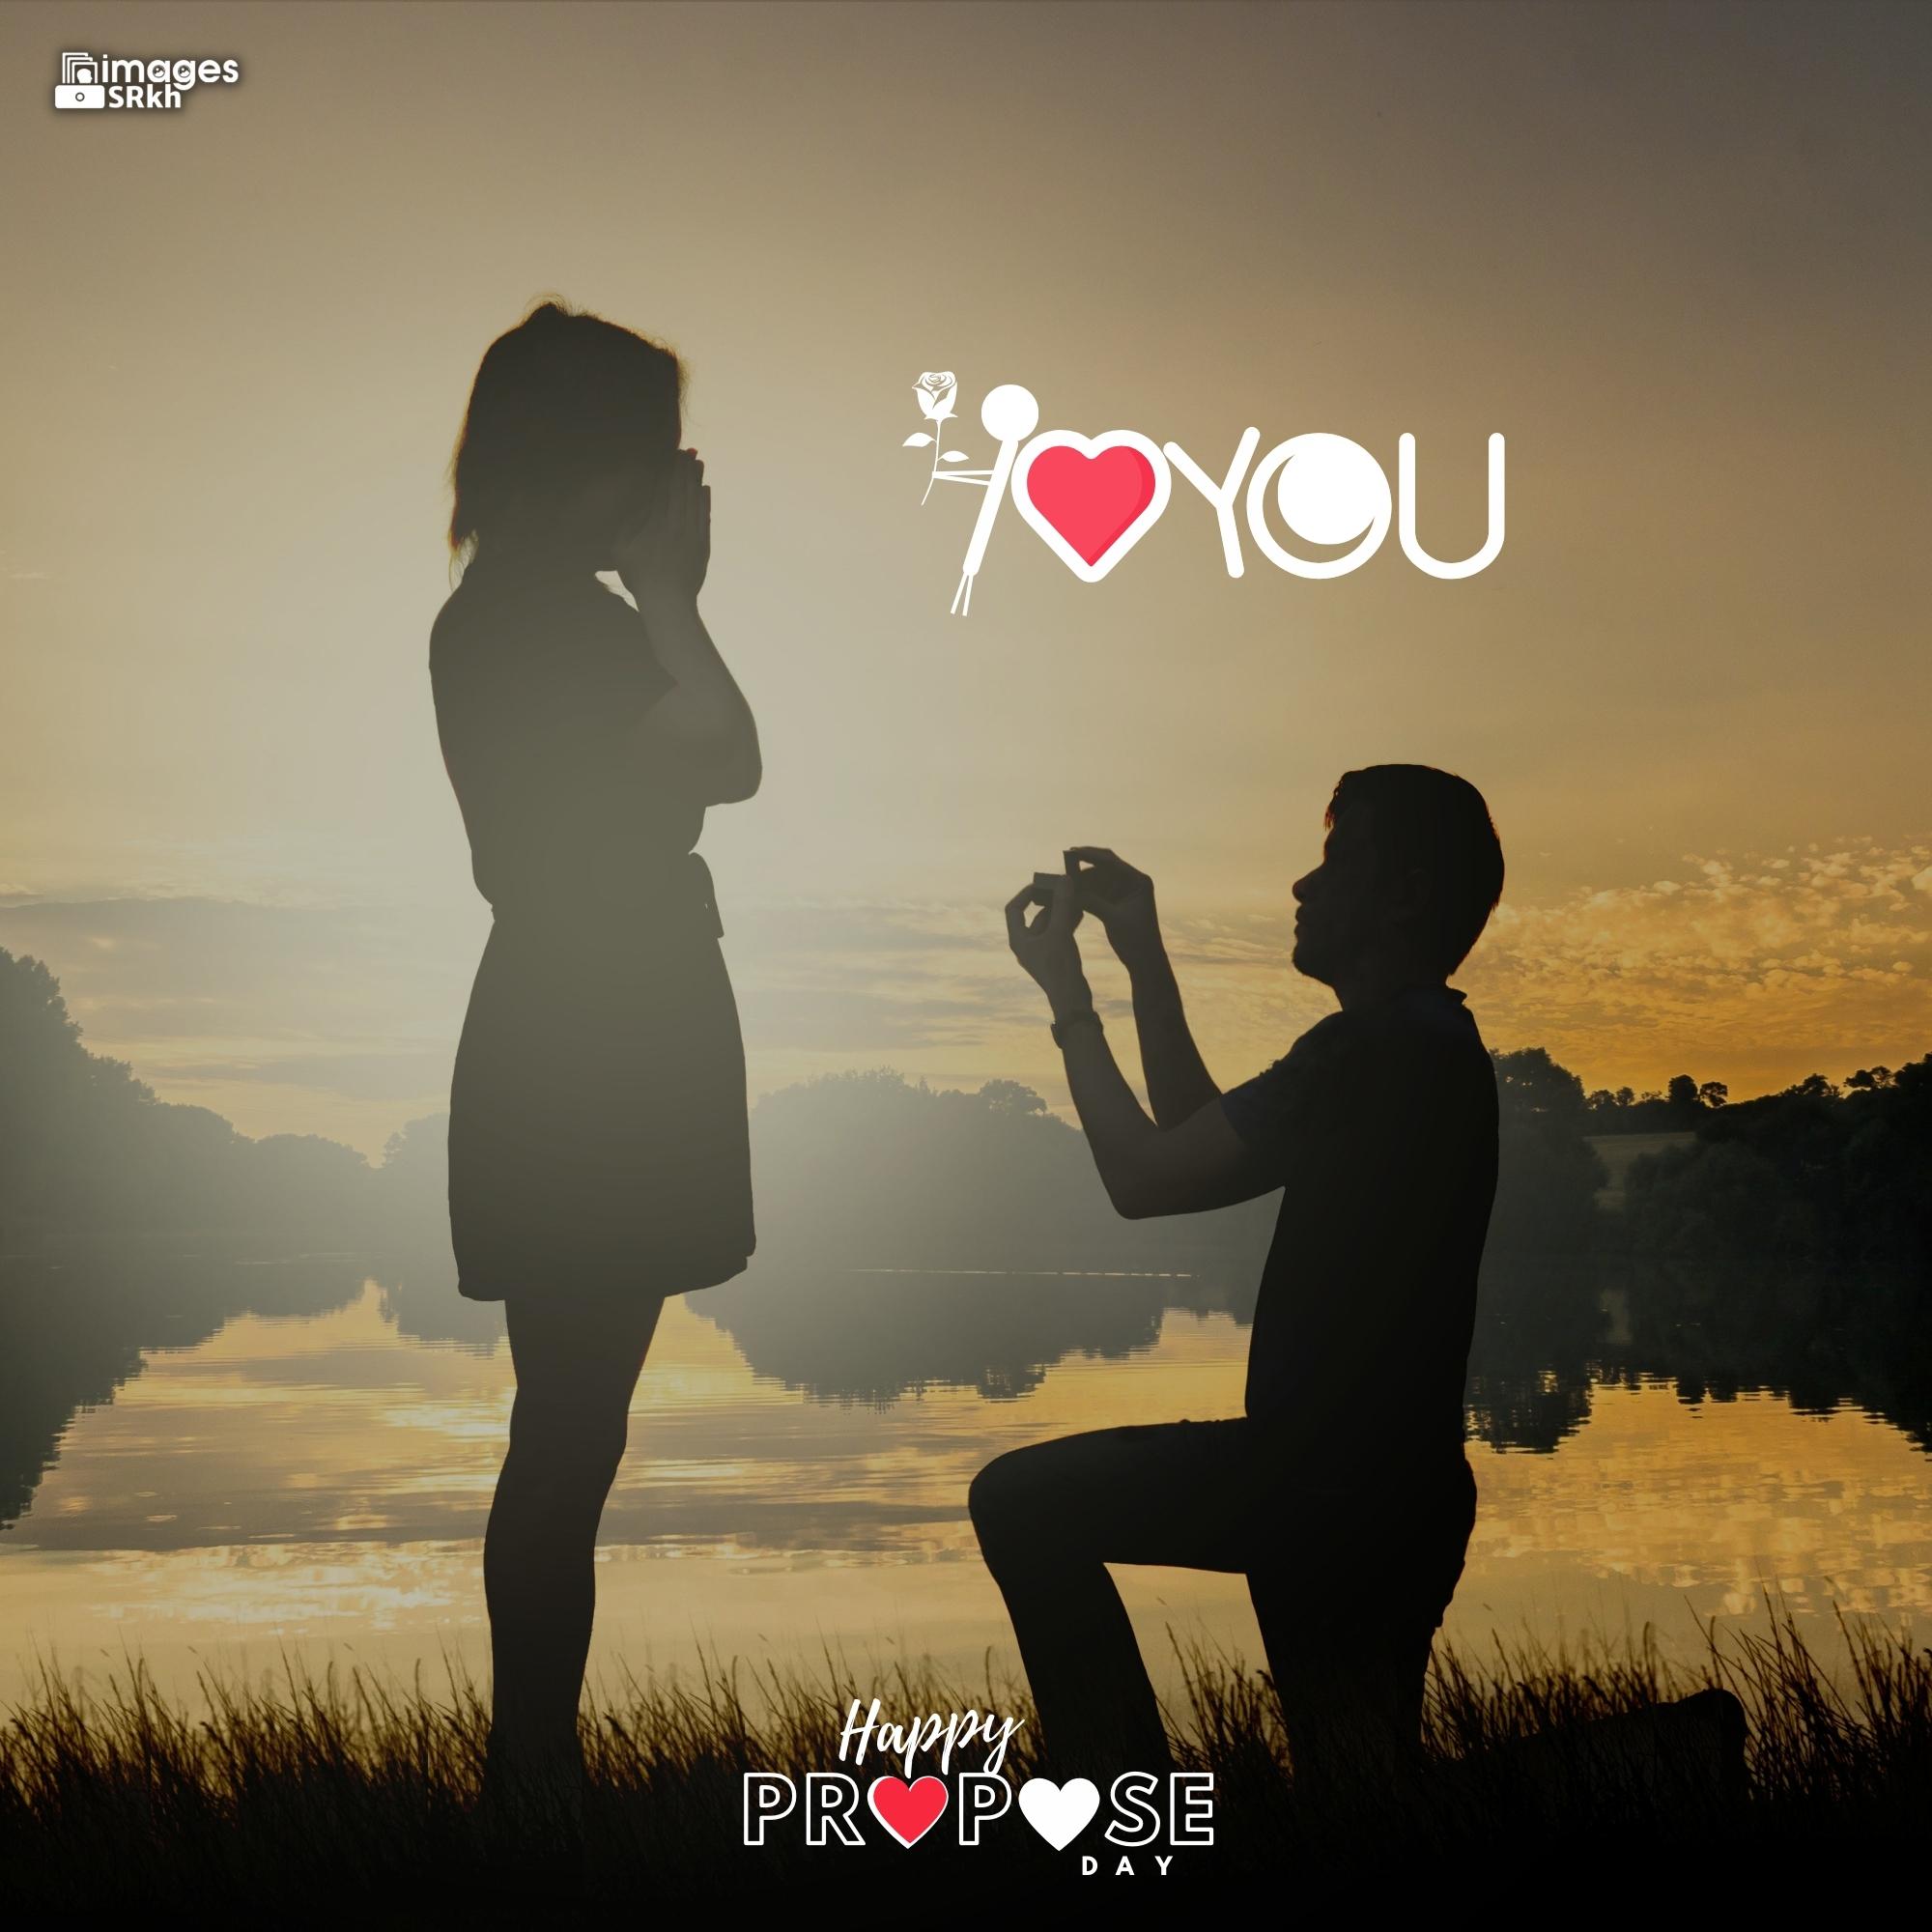 Happy Propose Day Images | 337 | I LOVE YOU